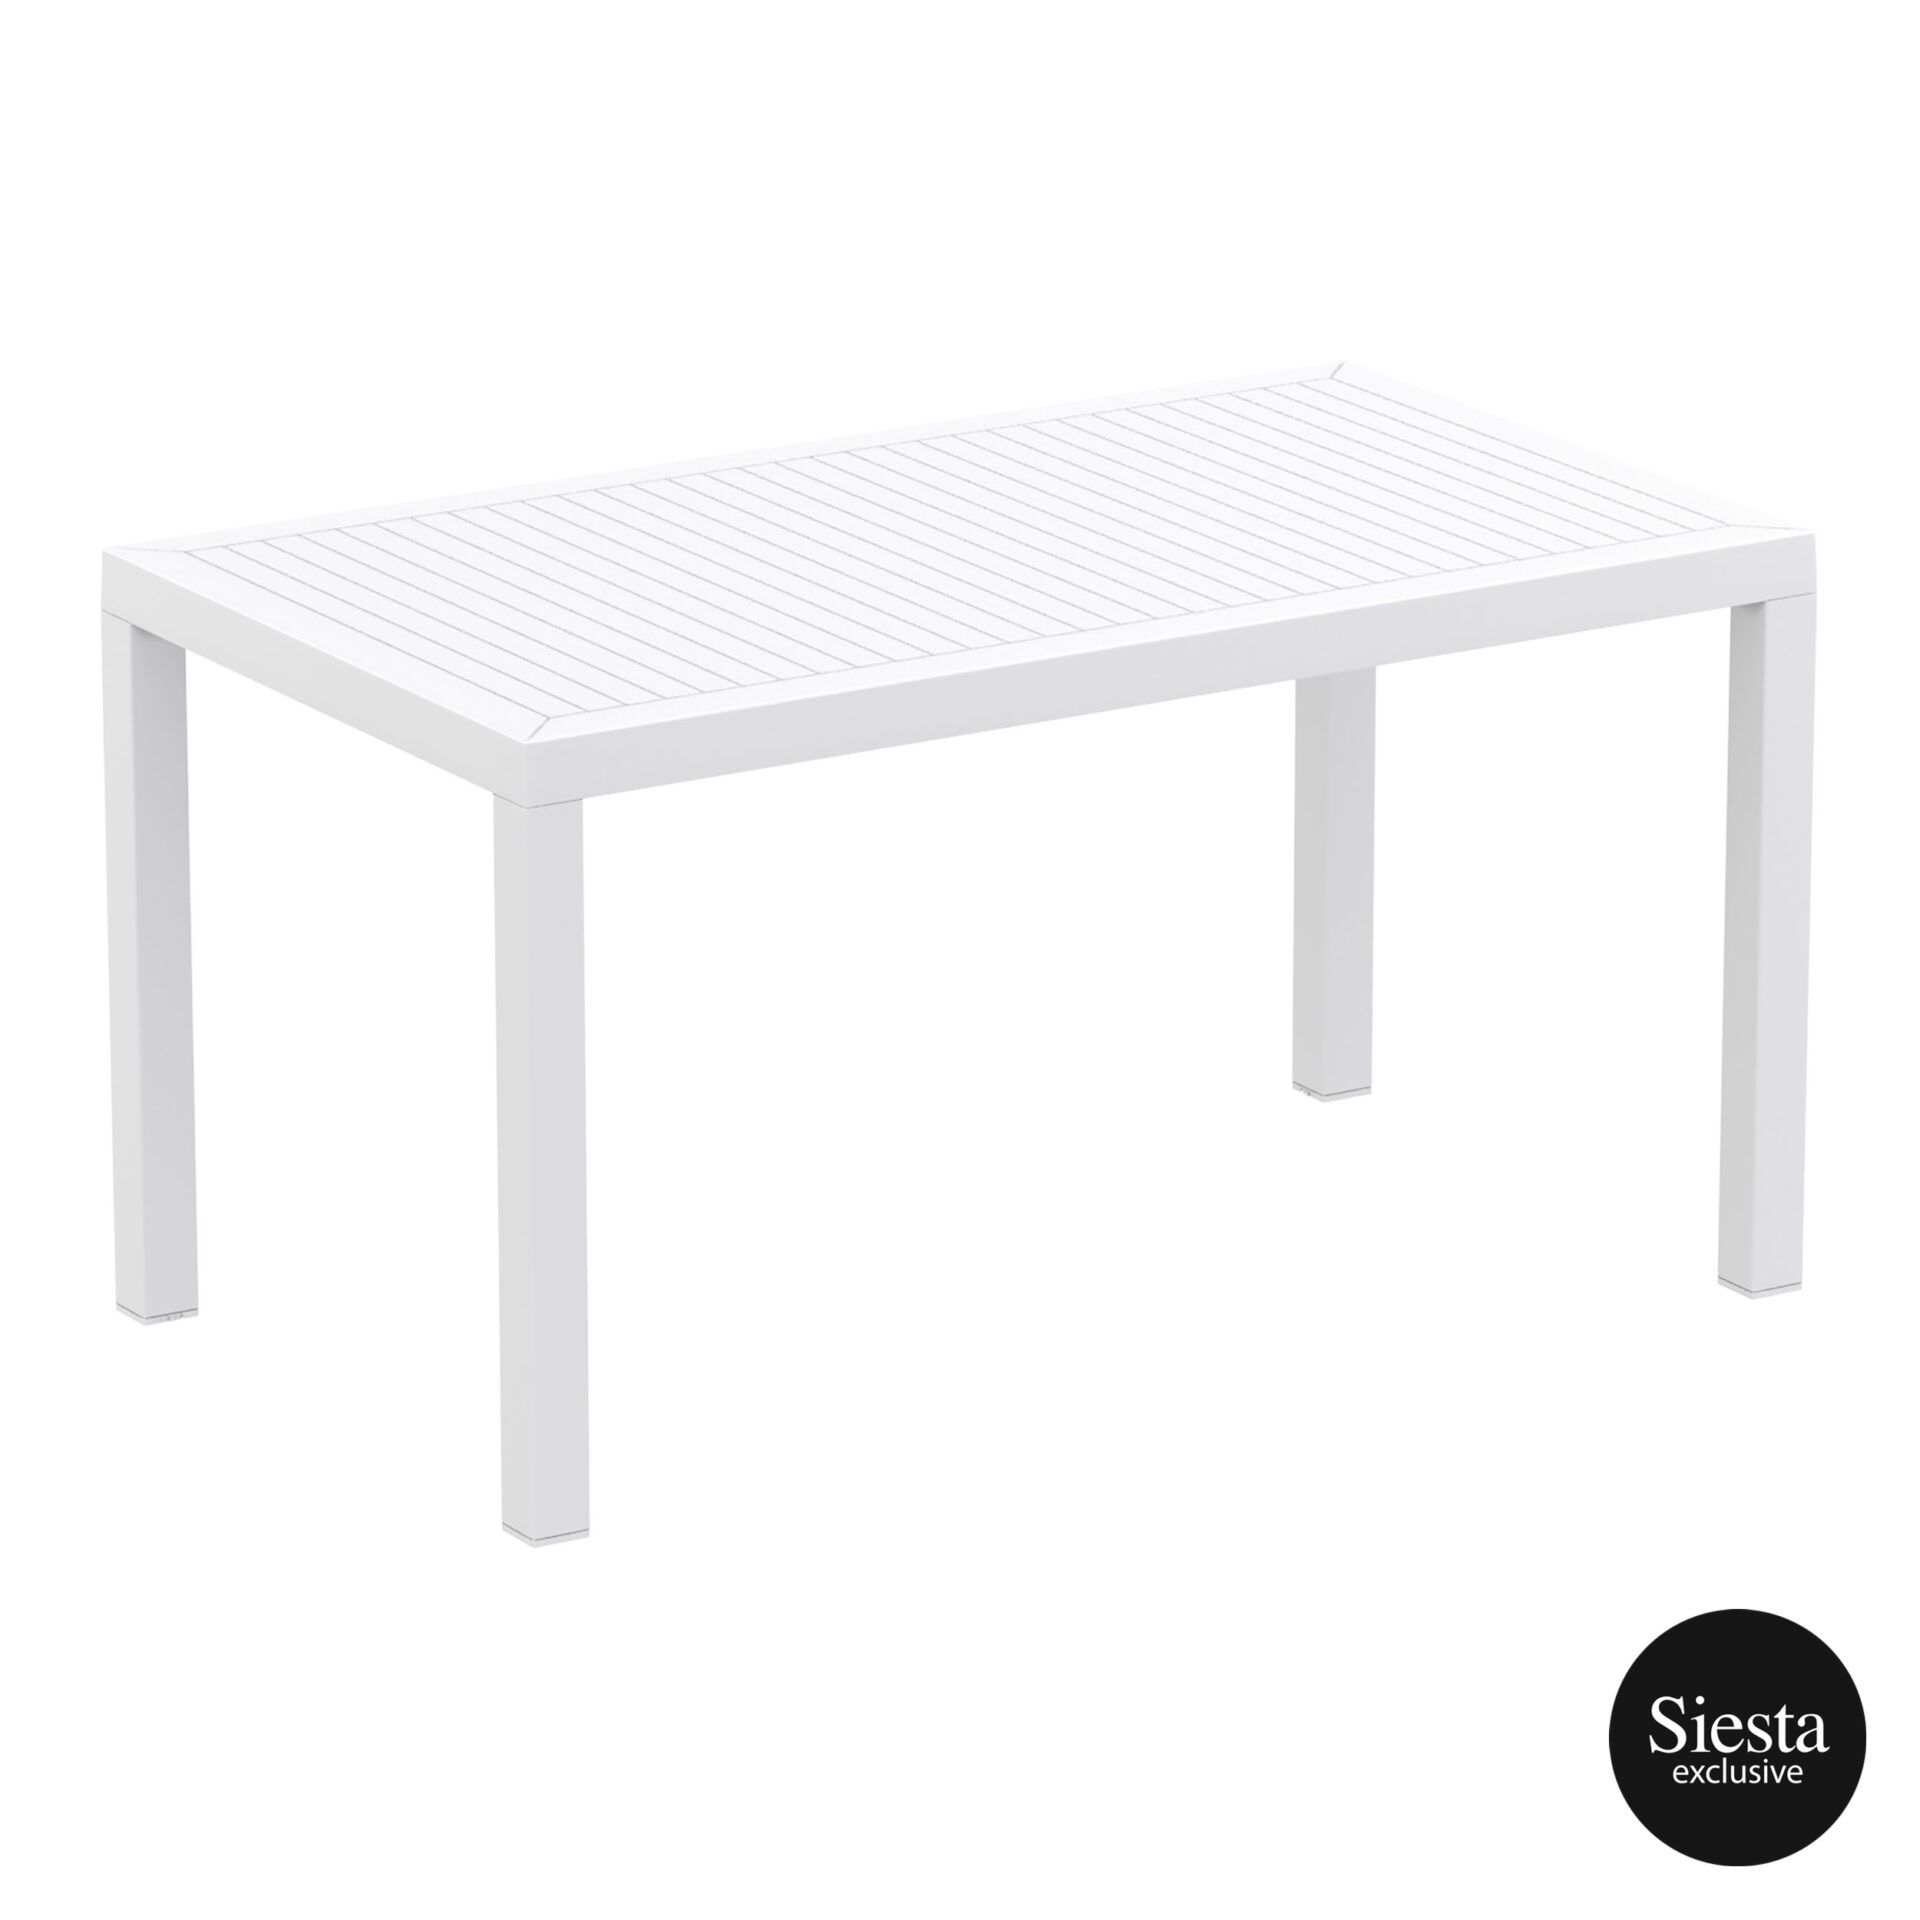 Ares 140 Table - White